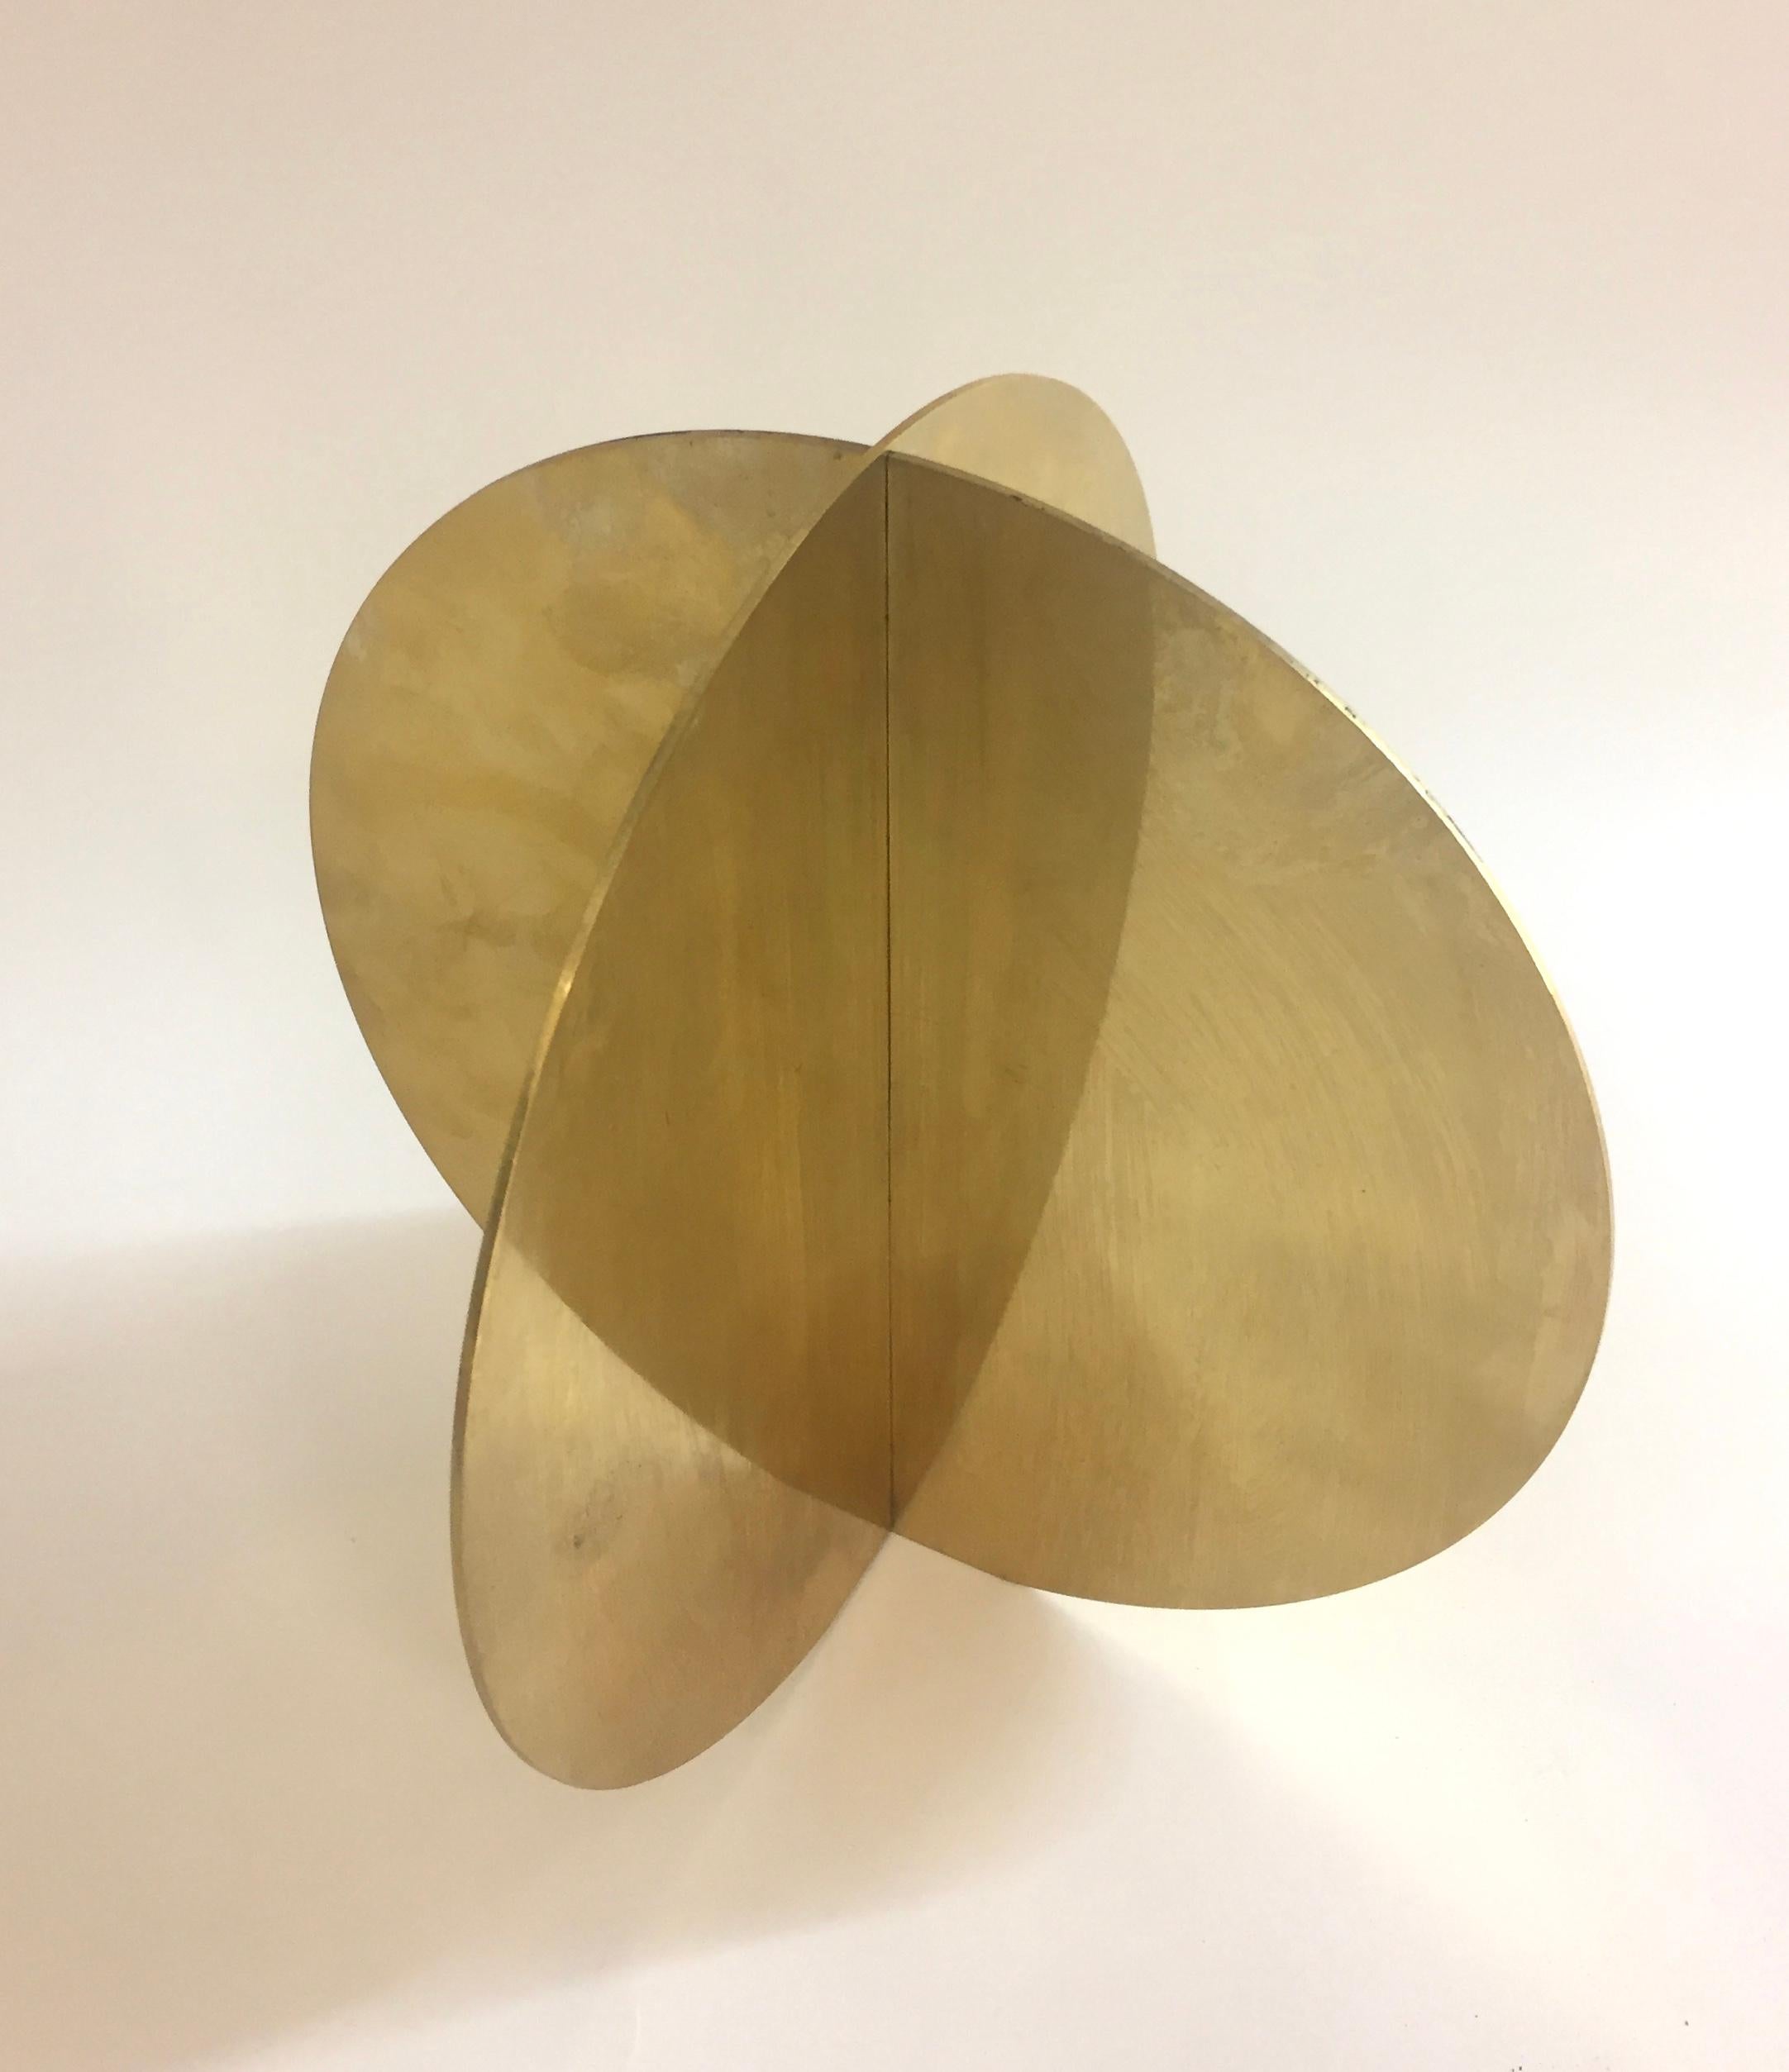 A Post-Modern Spanish sculpture made of brass and consisting of two assembled discs. Beautiful and elegant. Excellent condition.